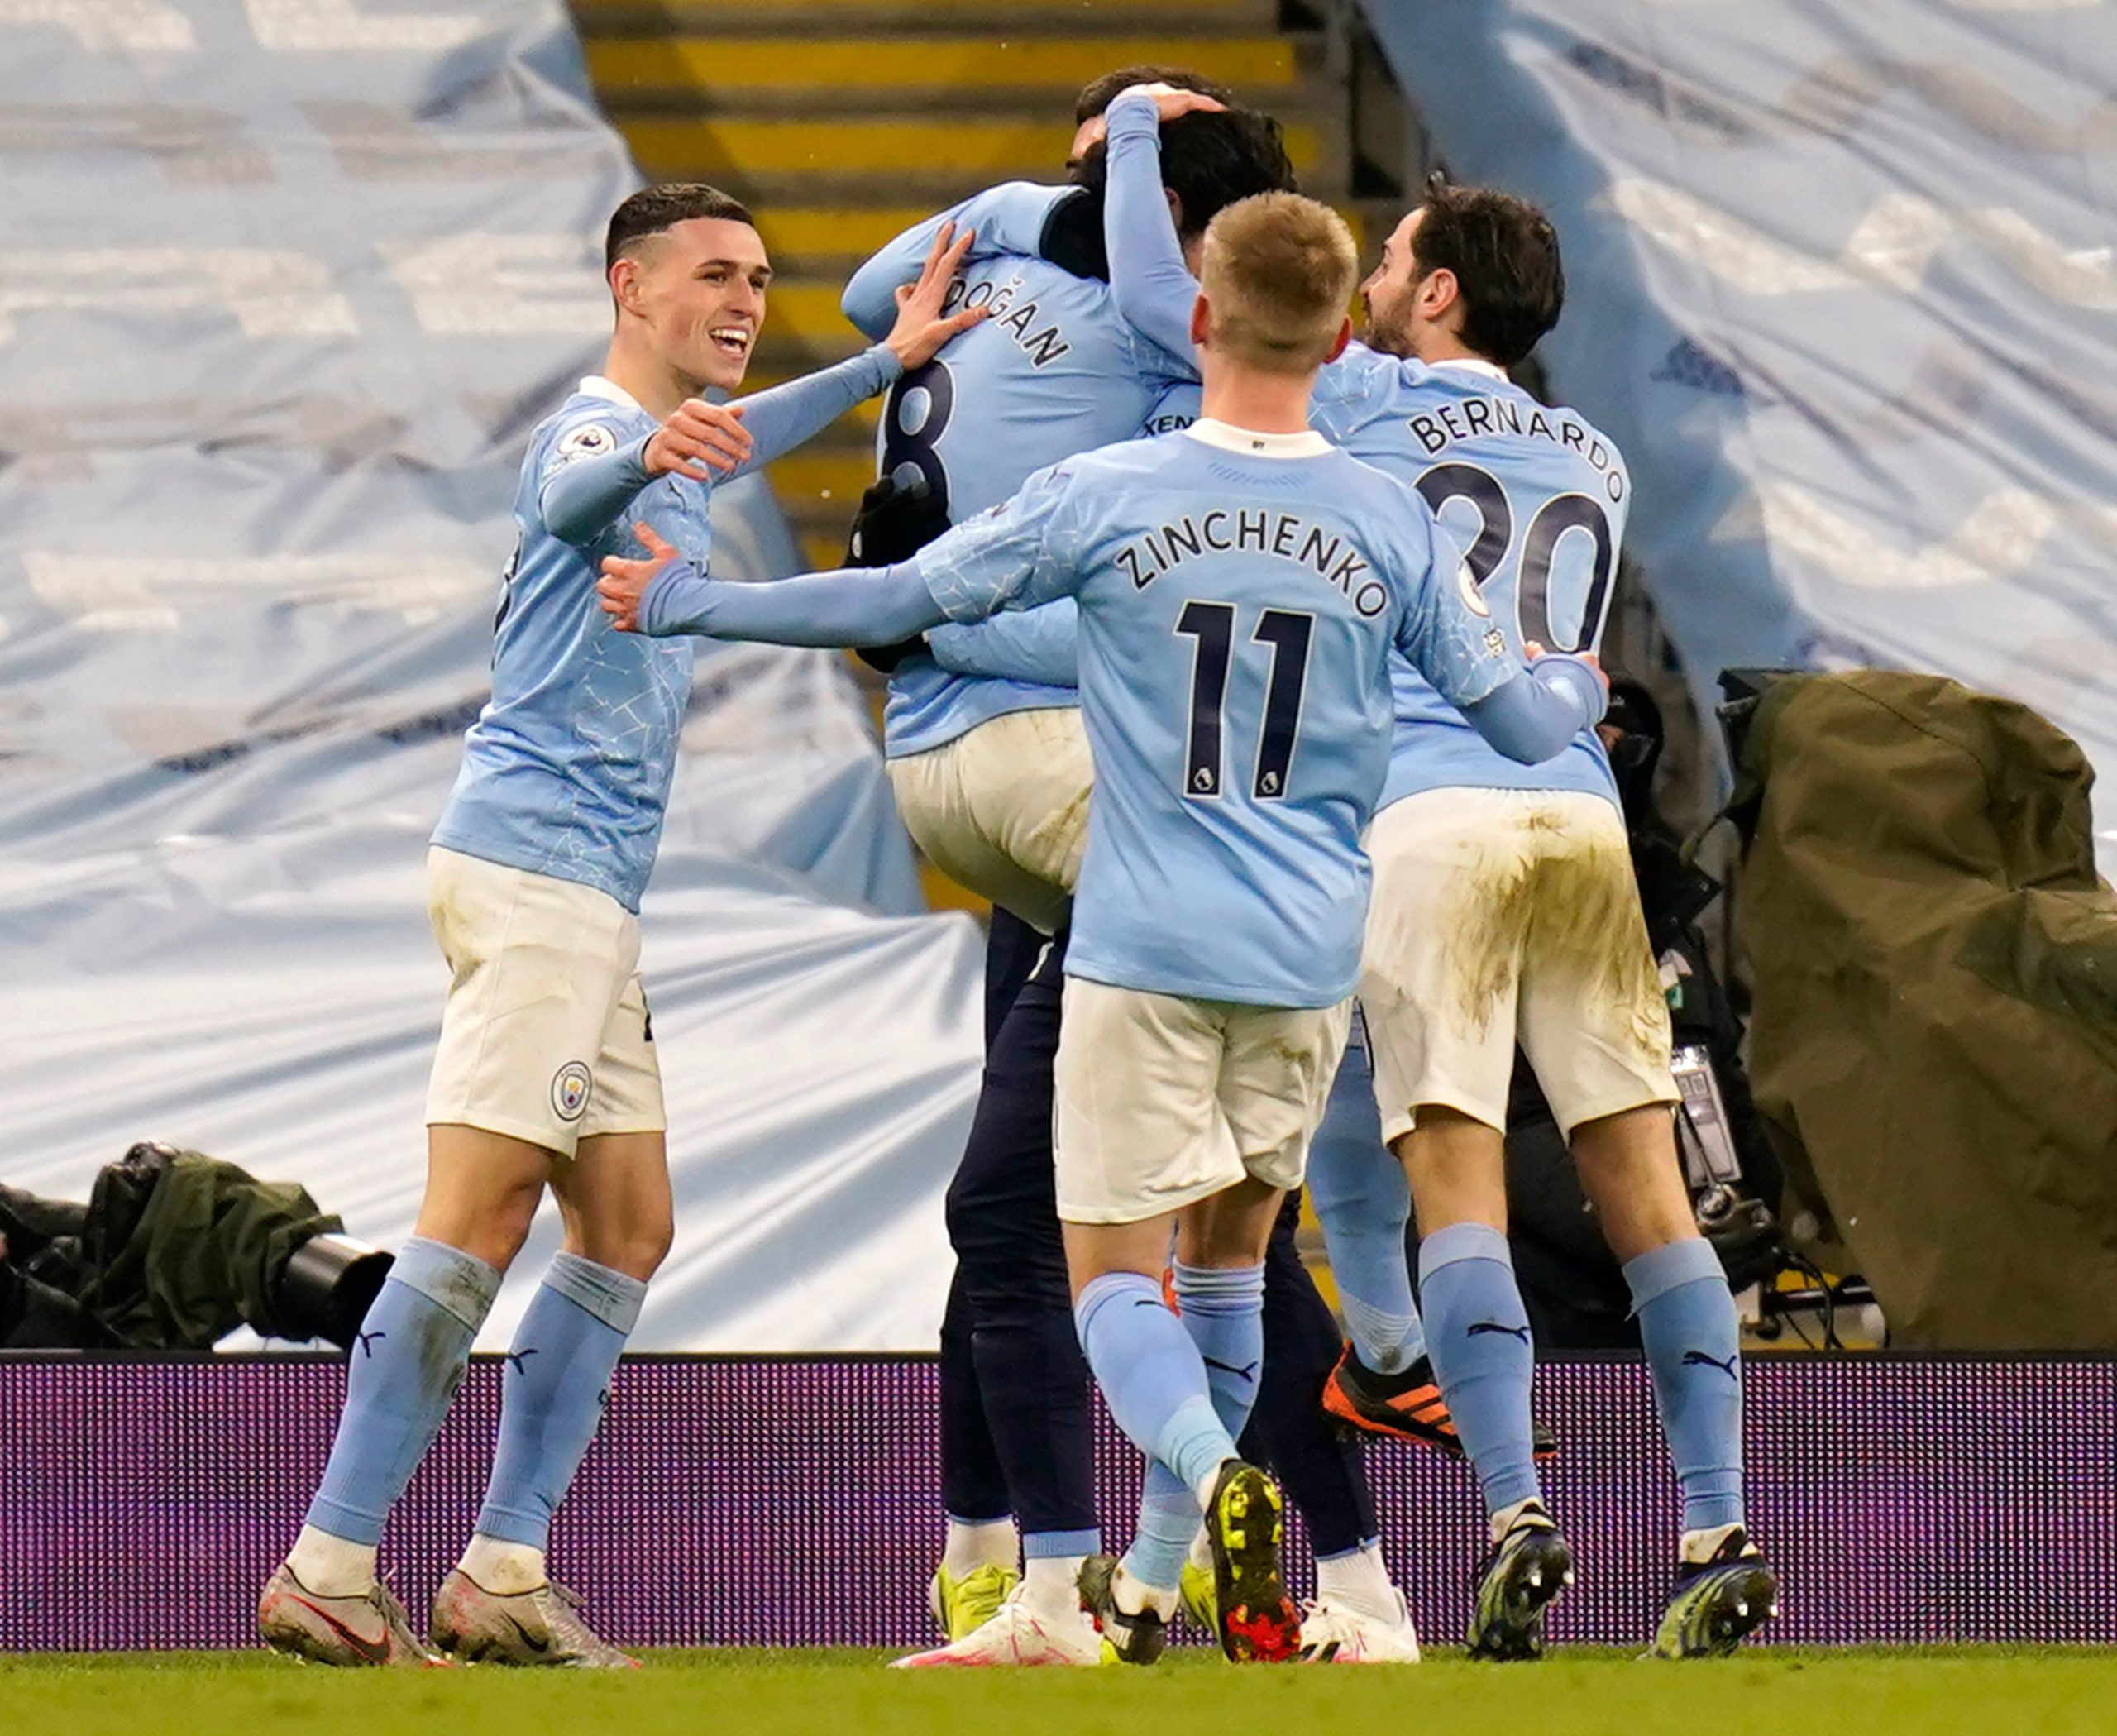 Manchester City Predicted Lineup Vs Borussia Mönchengladbach (Man City players are celebrating in the photo)